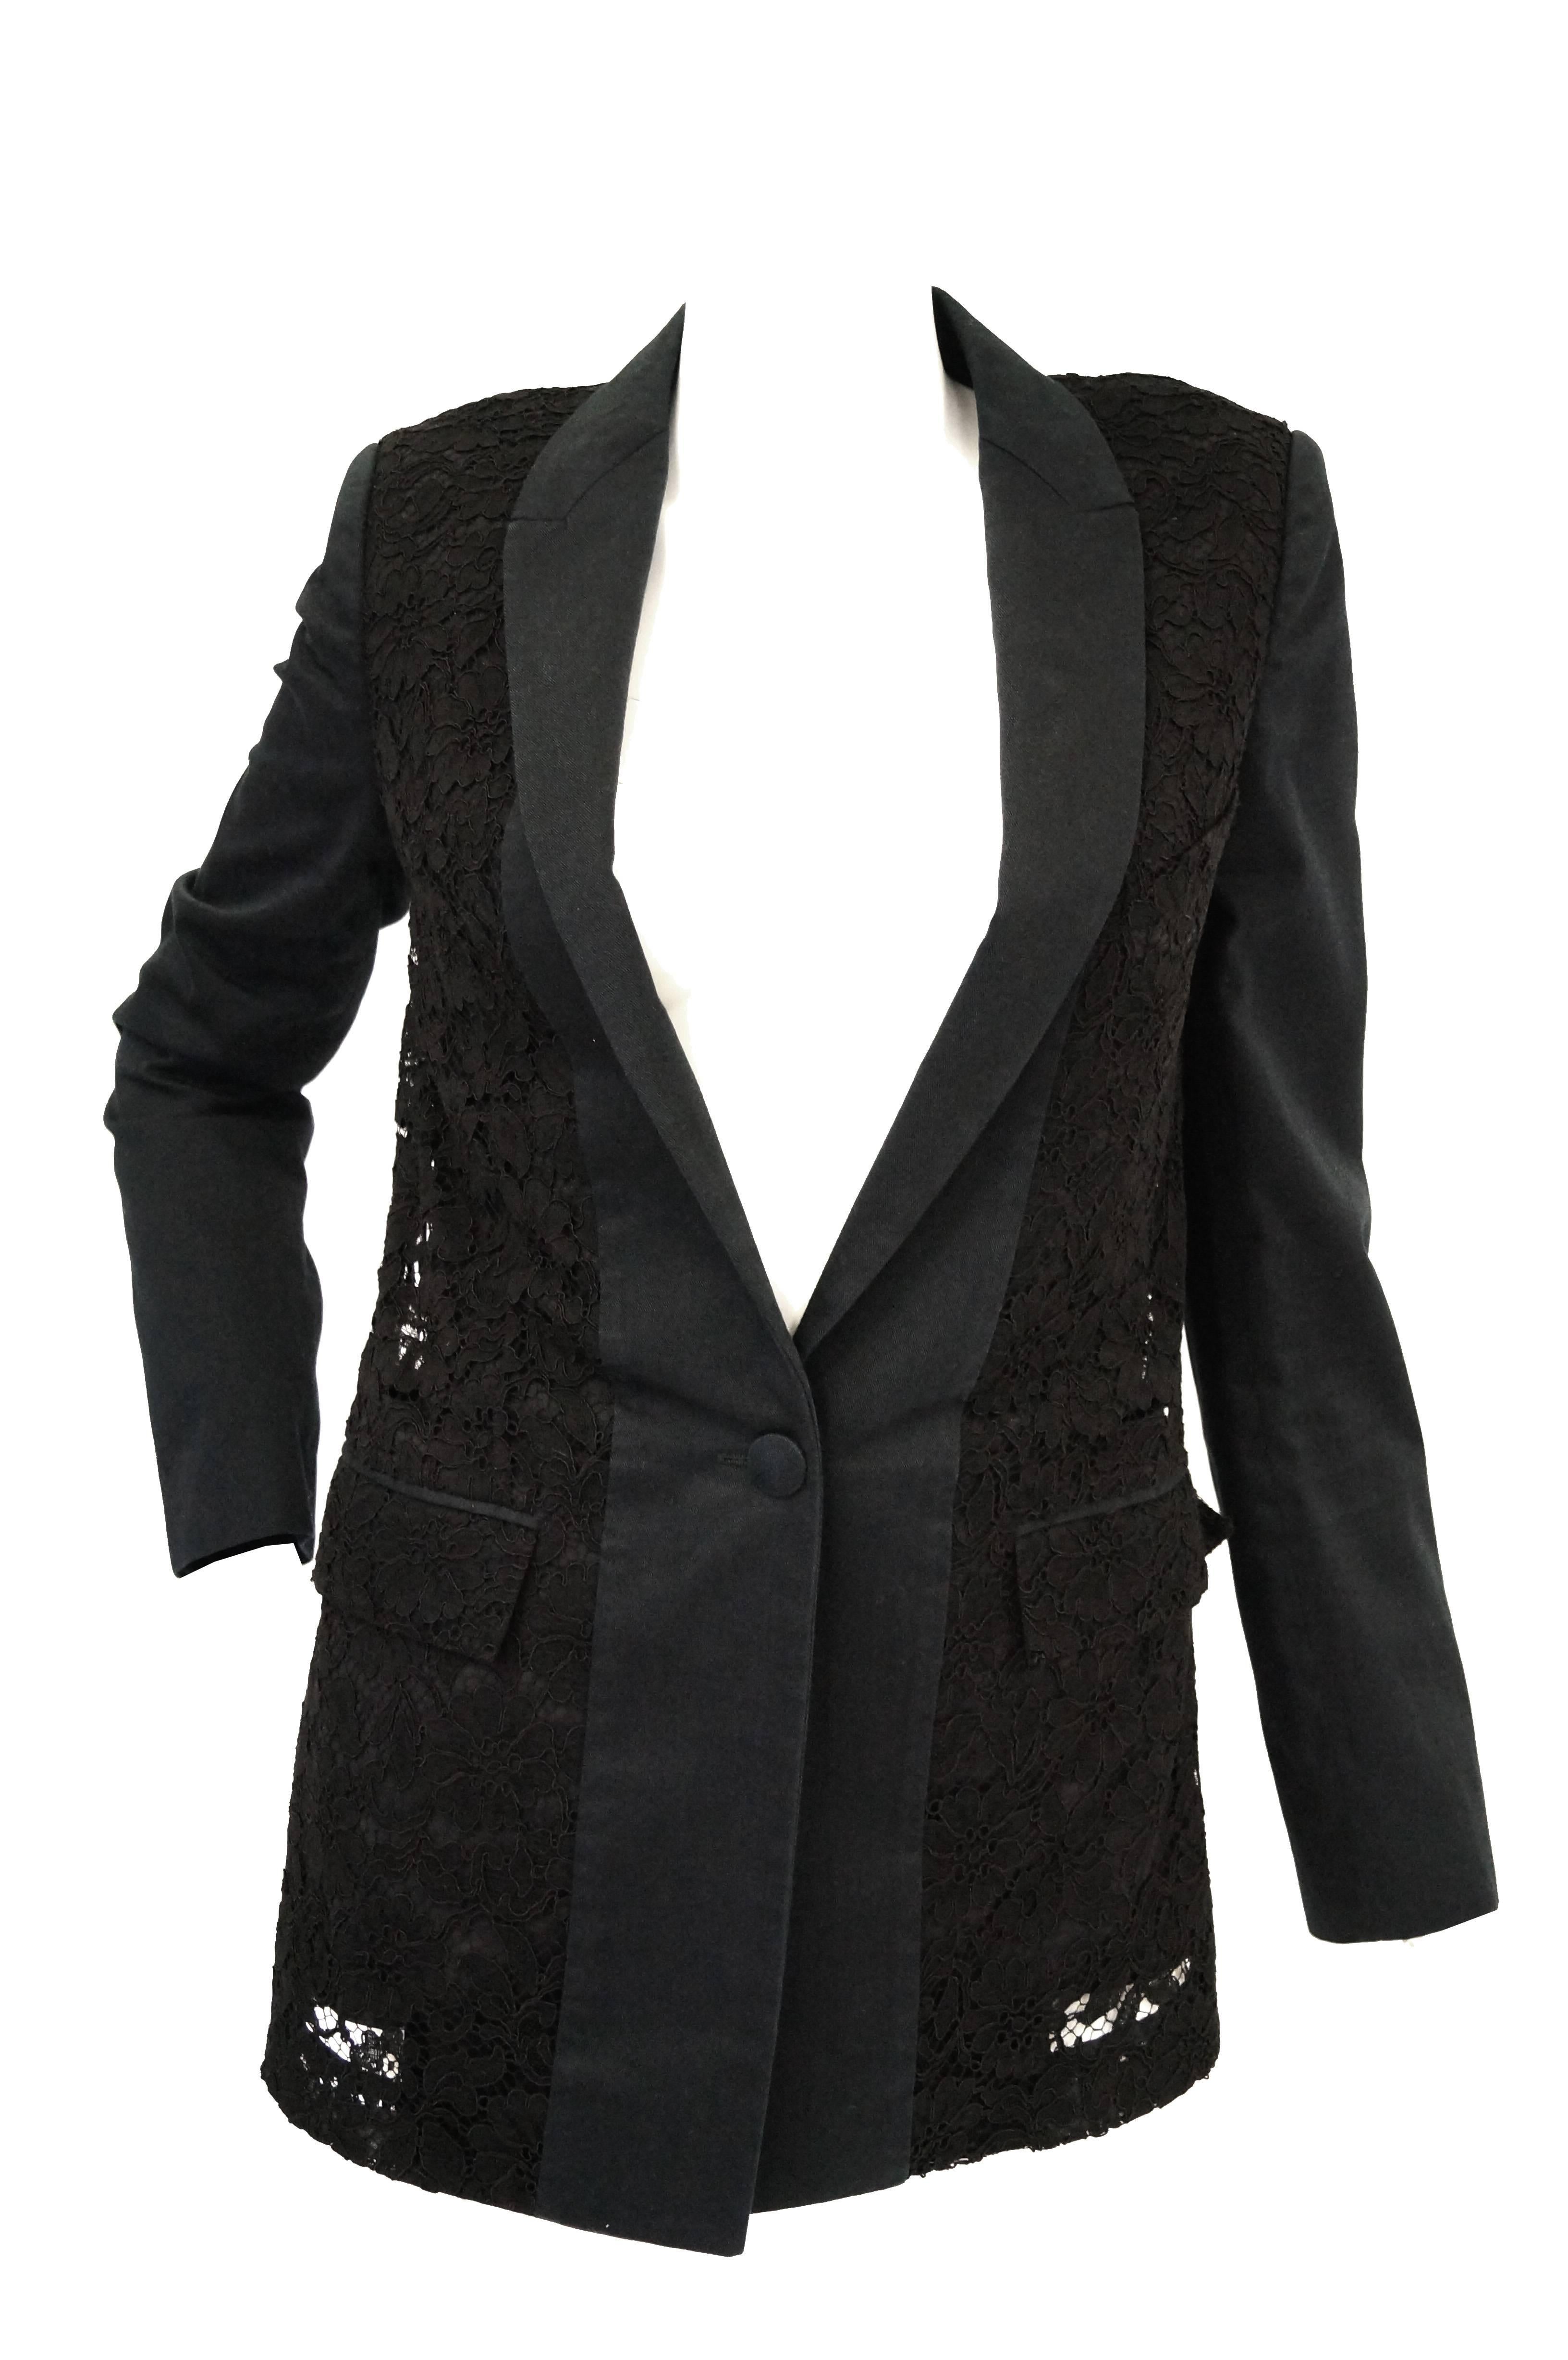 Gorgeous black lace thin lapel longline blazer by Hubert de Givenchy. The blazer features long sleeves, a low neckline with narrow solid black lapels, two pockets, and hit at the waist. The blazer has structured shoulders, and a single button